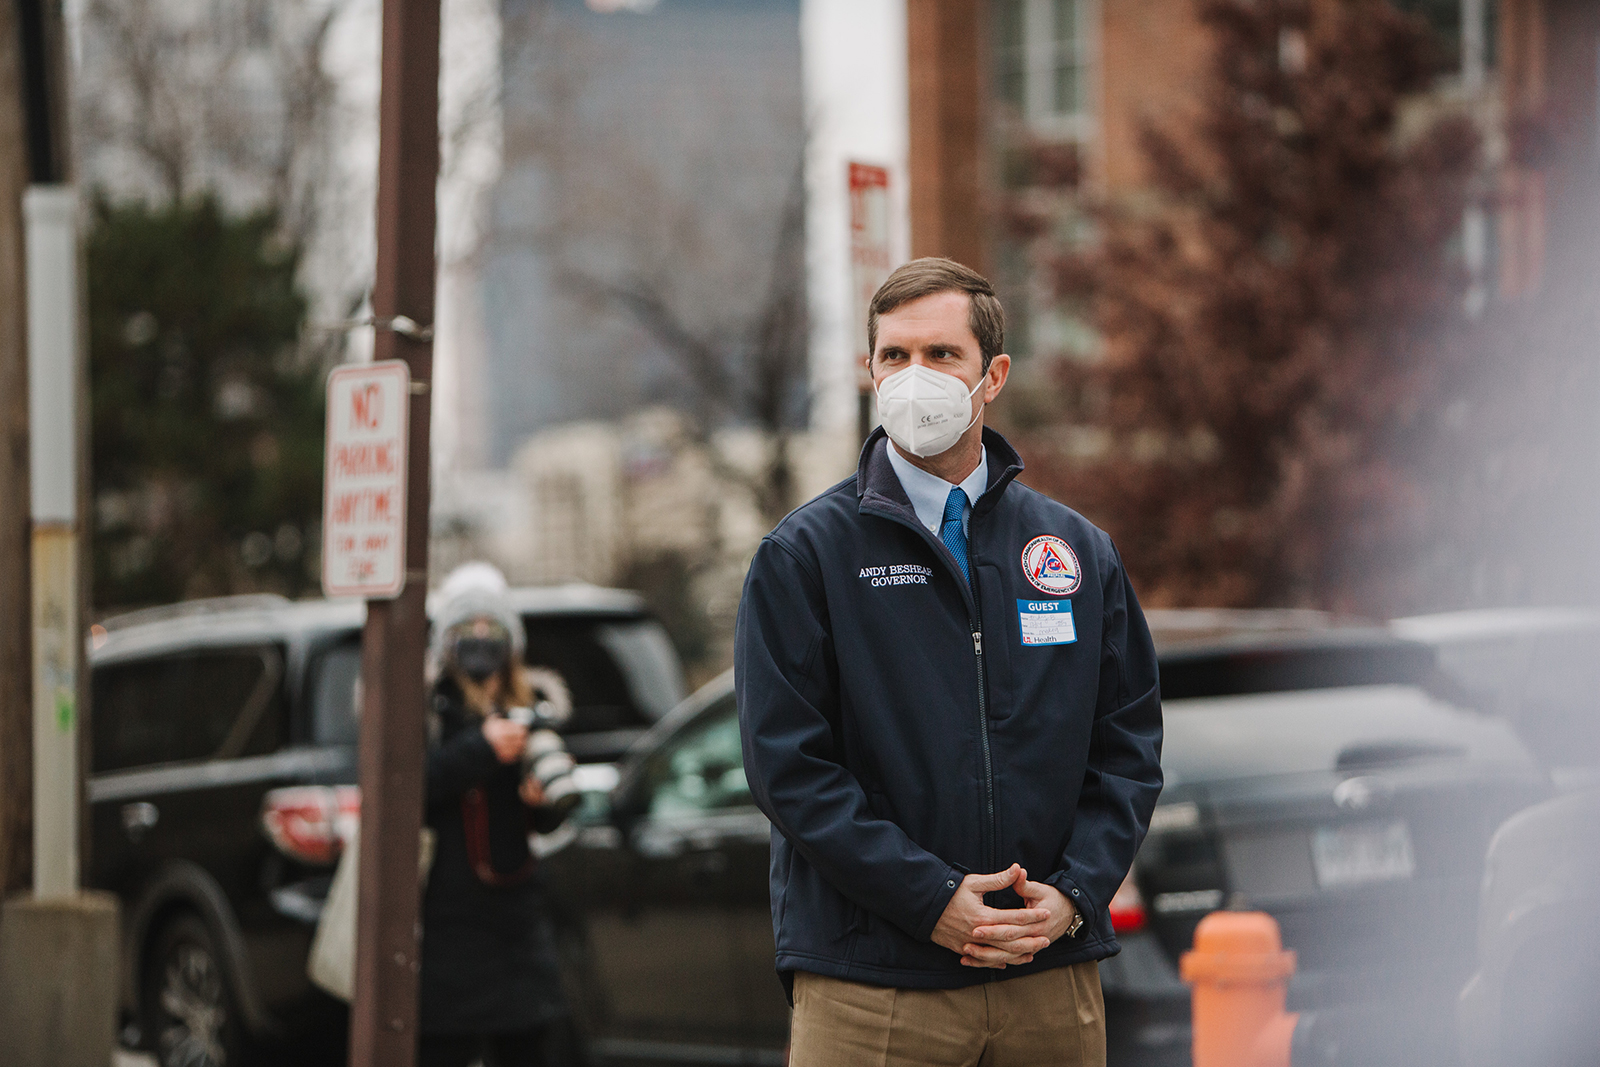 Andy Beshear, Governor of Kentucky, arrives at the University of Louisville Hospital in Louisville, Ky. On December 14, 2020.